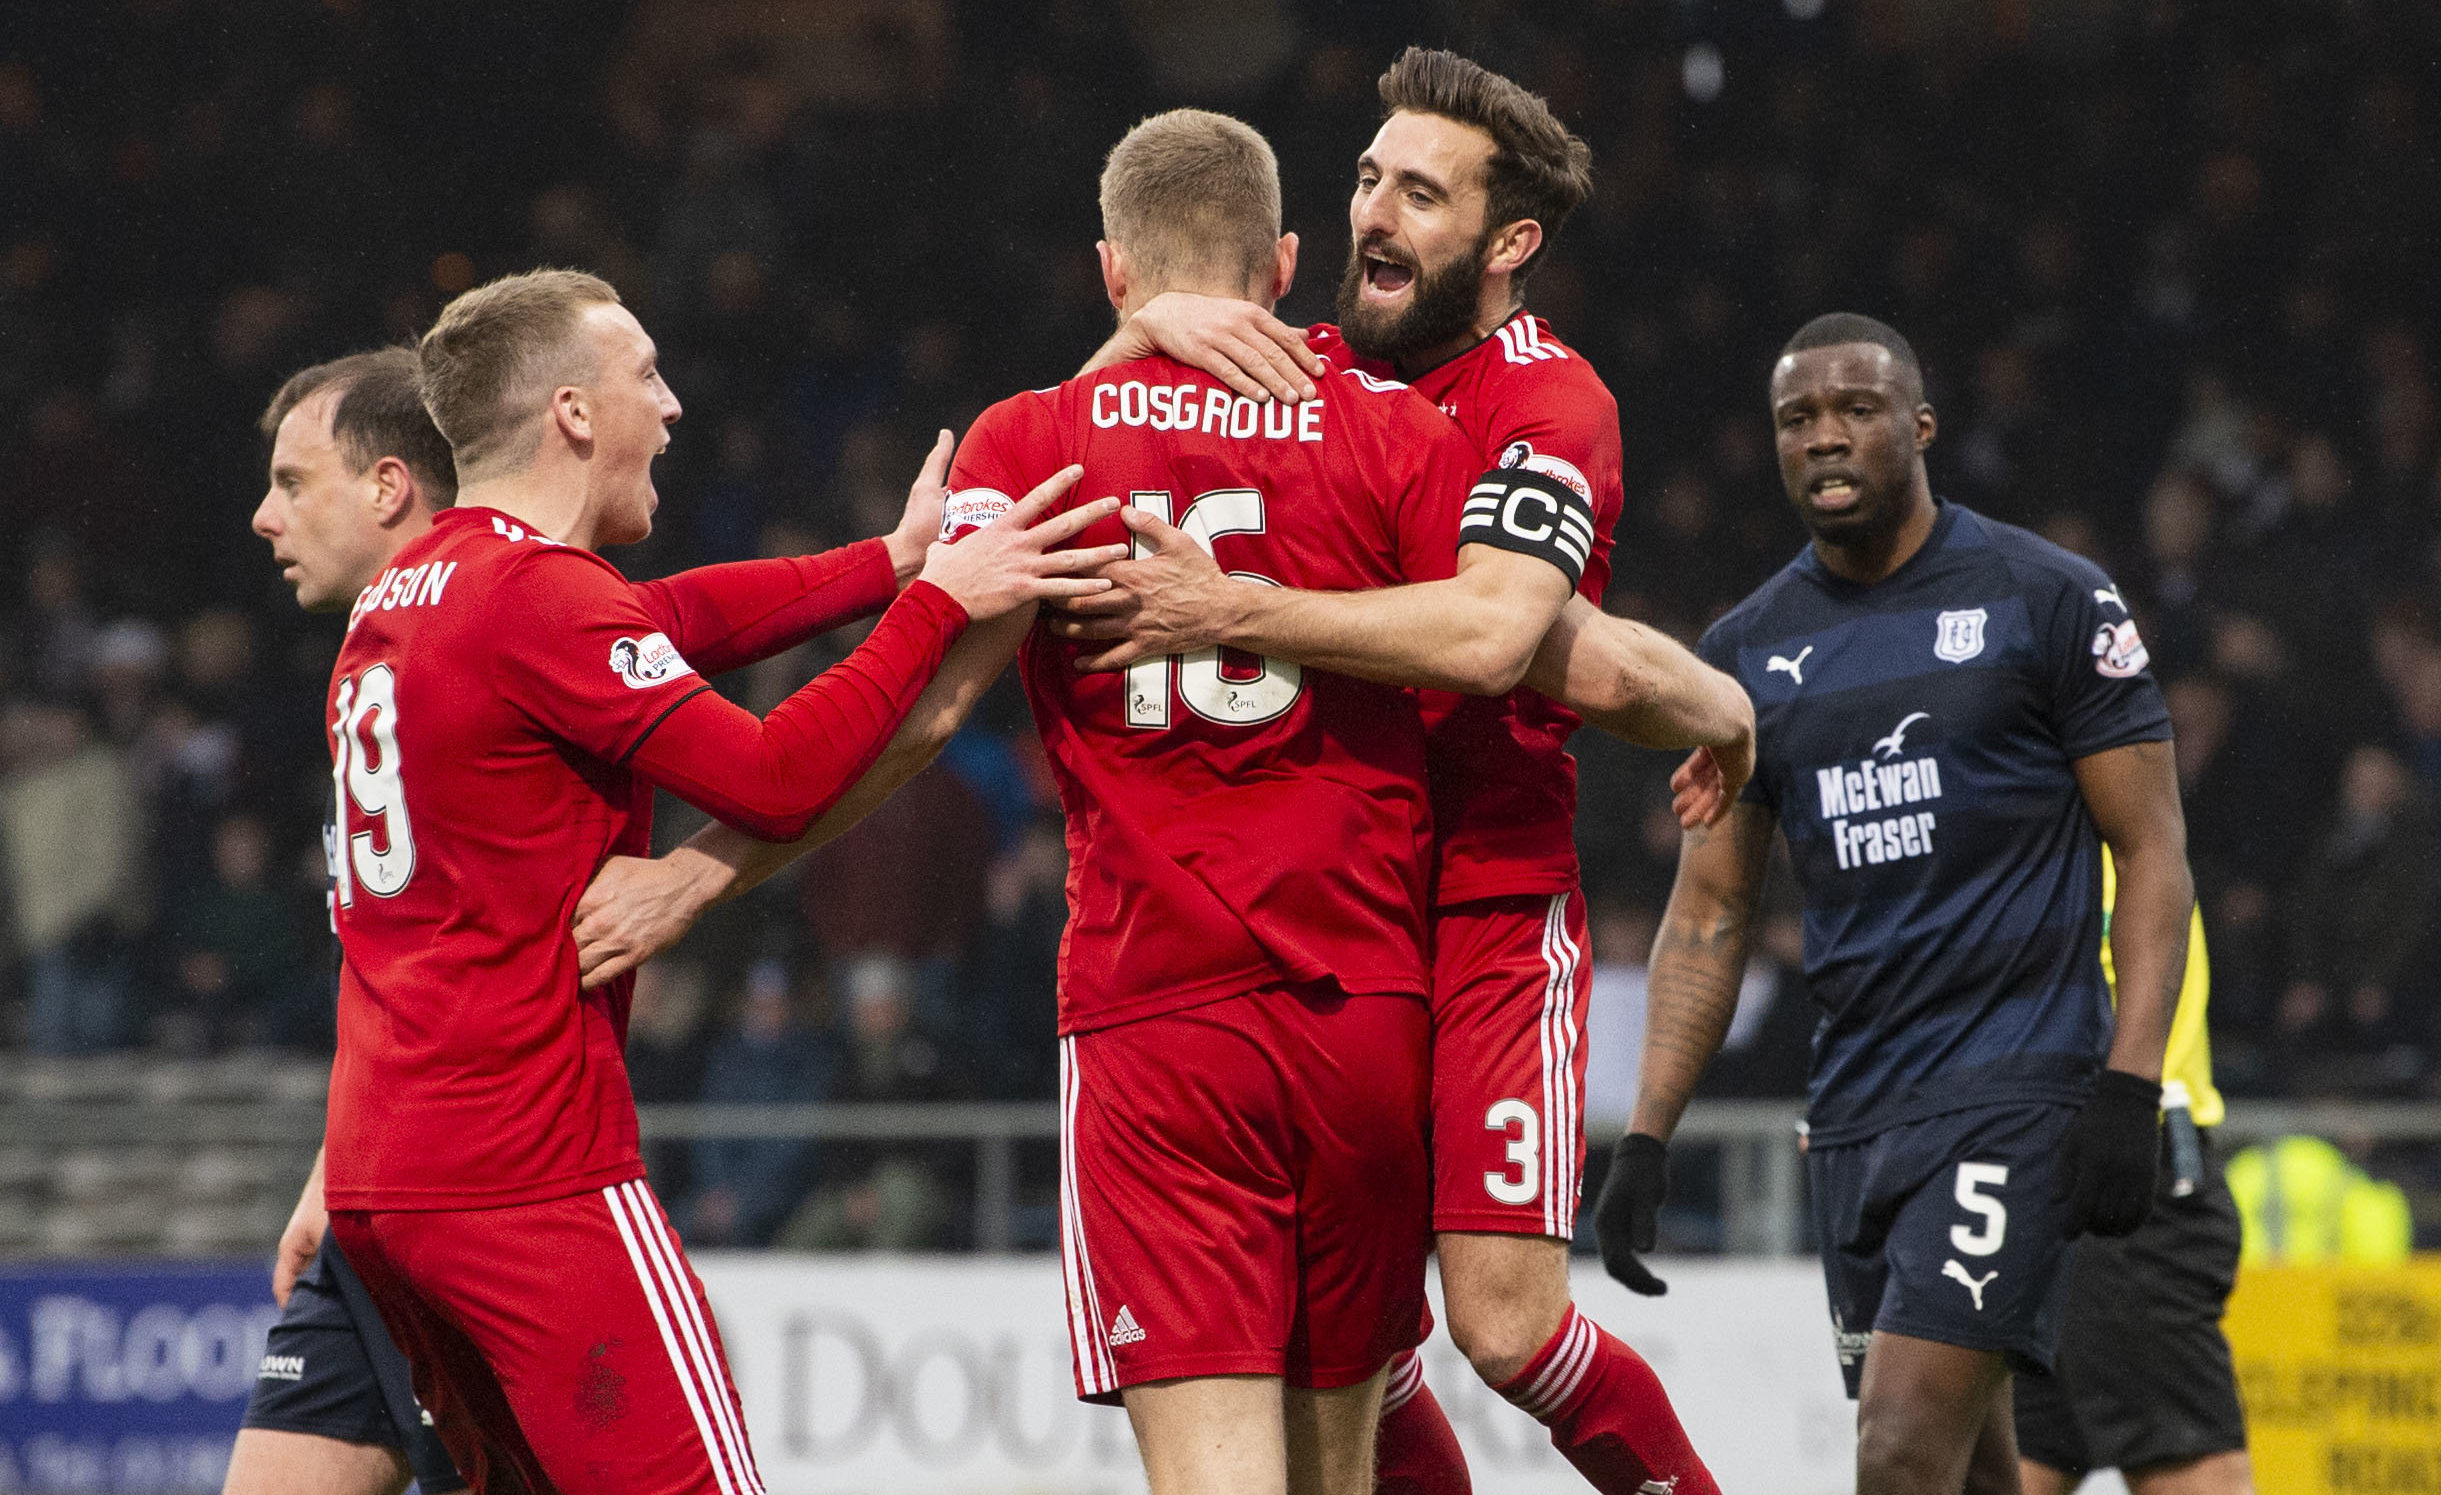 Aberdeen's Sam Cosgrove celebrates putting his side 1-0 up with Graeme Shinnie and Lewis Ferguson (L).